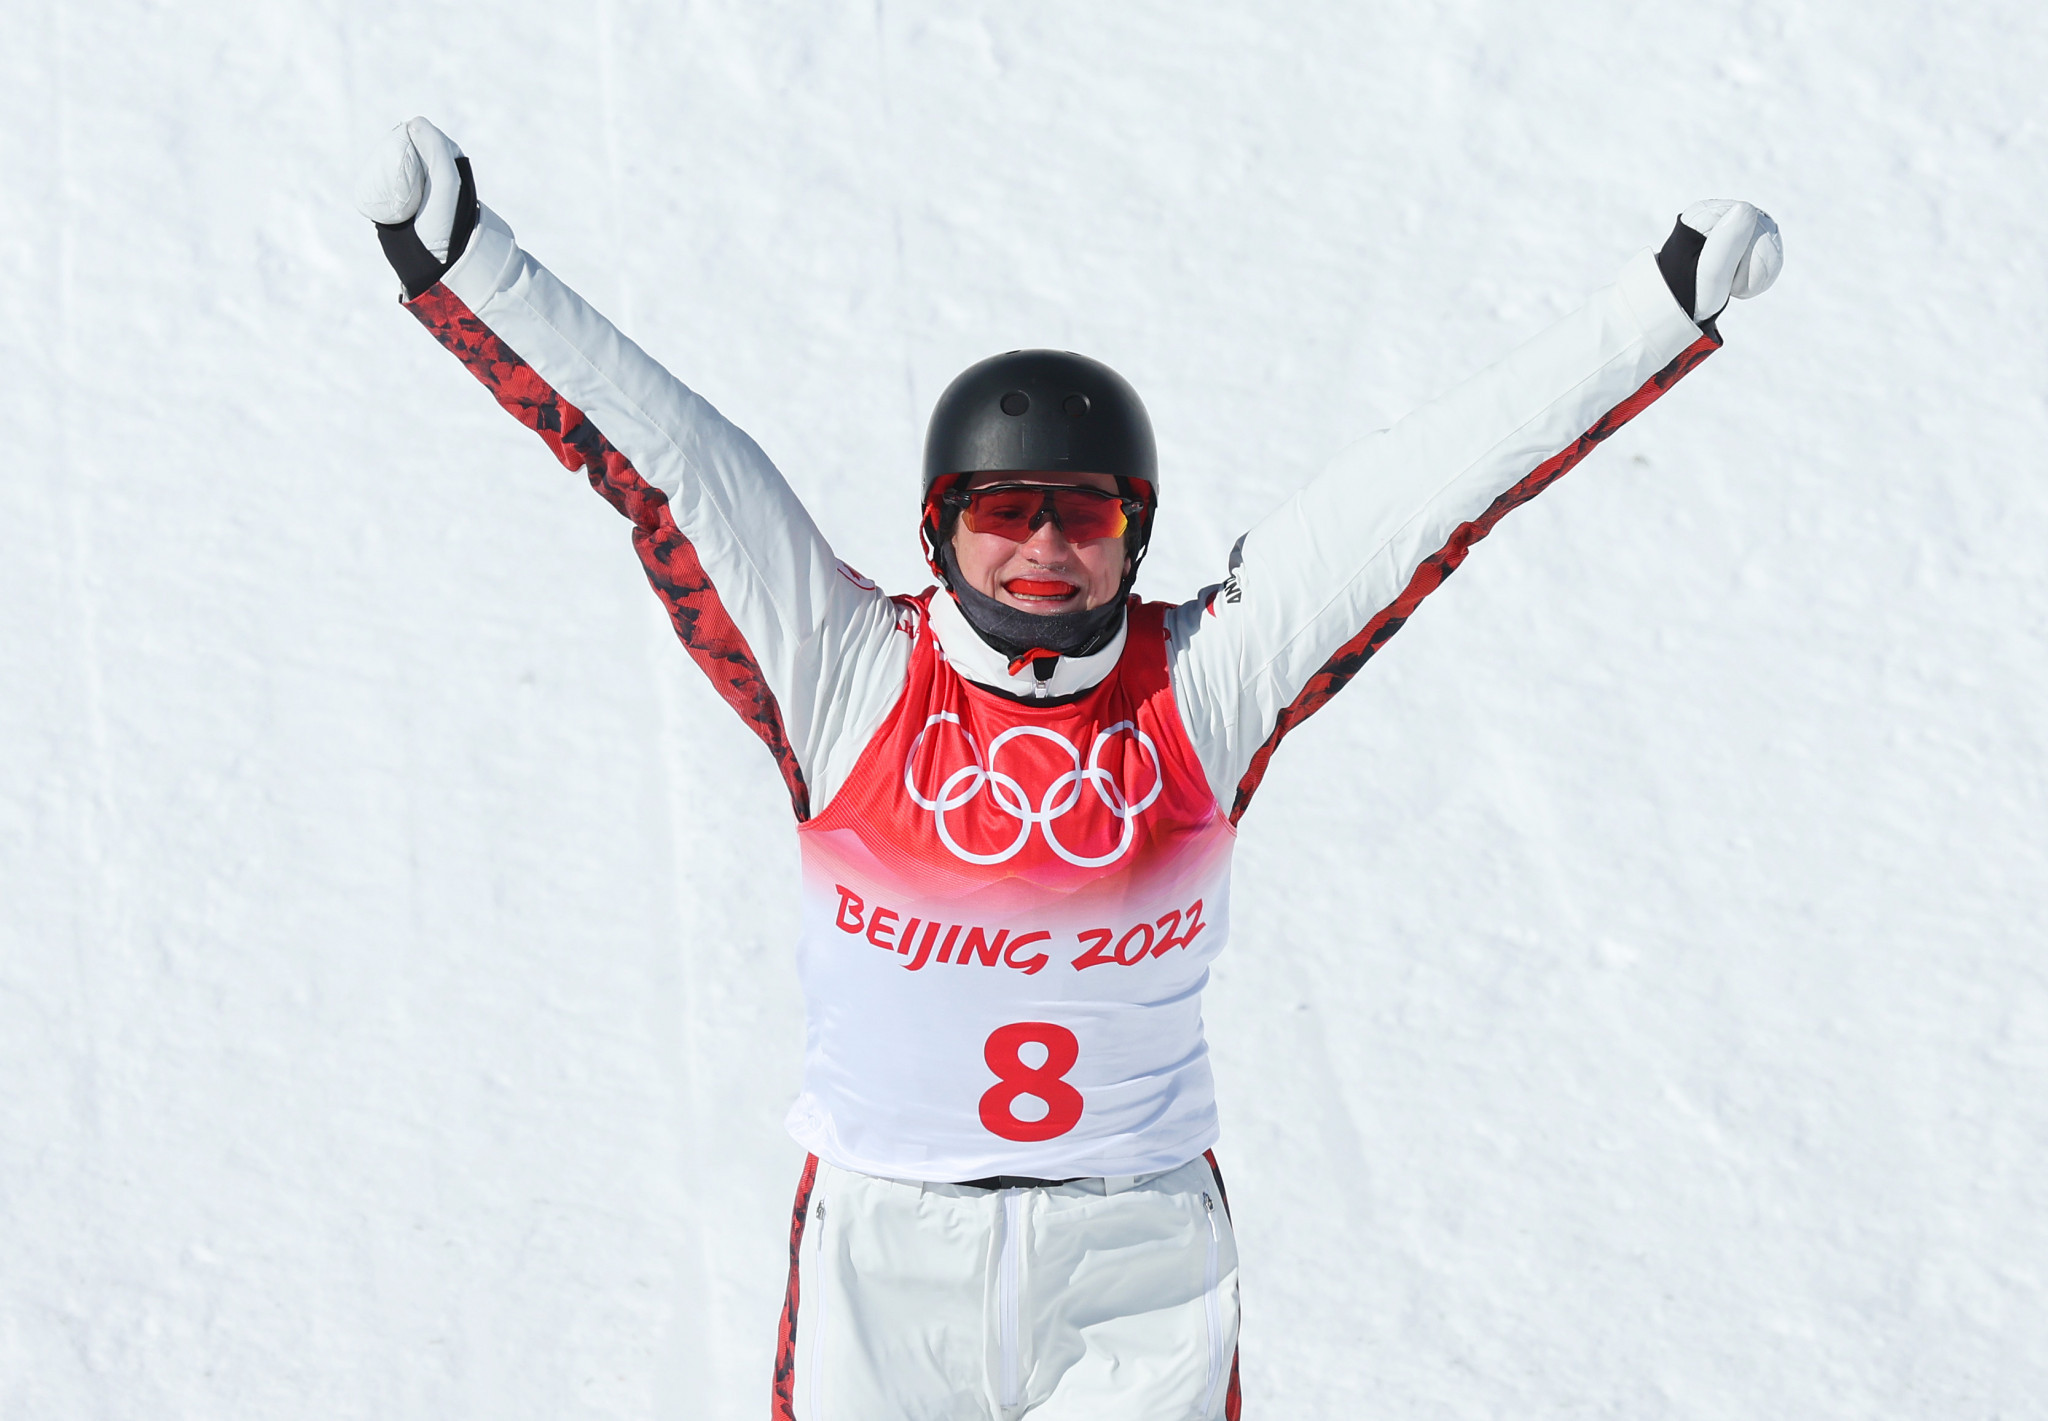 Marion Thénault won bronze in mixed team aerials at Beijing 2022 and will be monitored as she travels to compete around the world  ©Getty Images